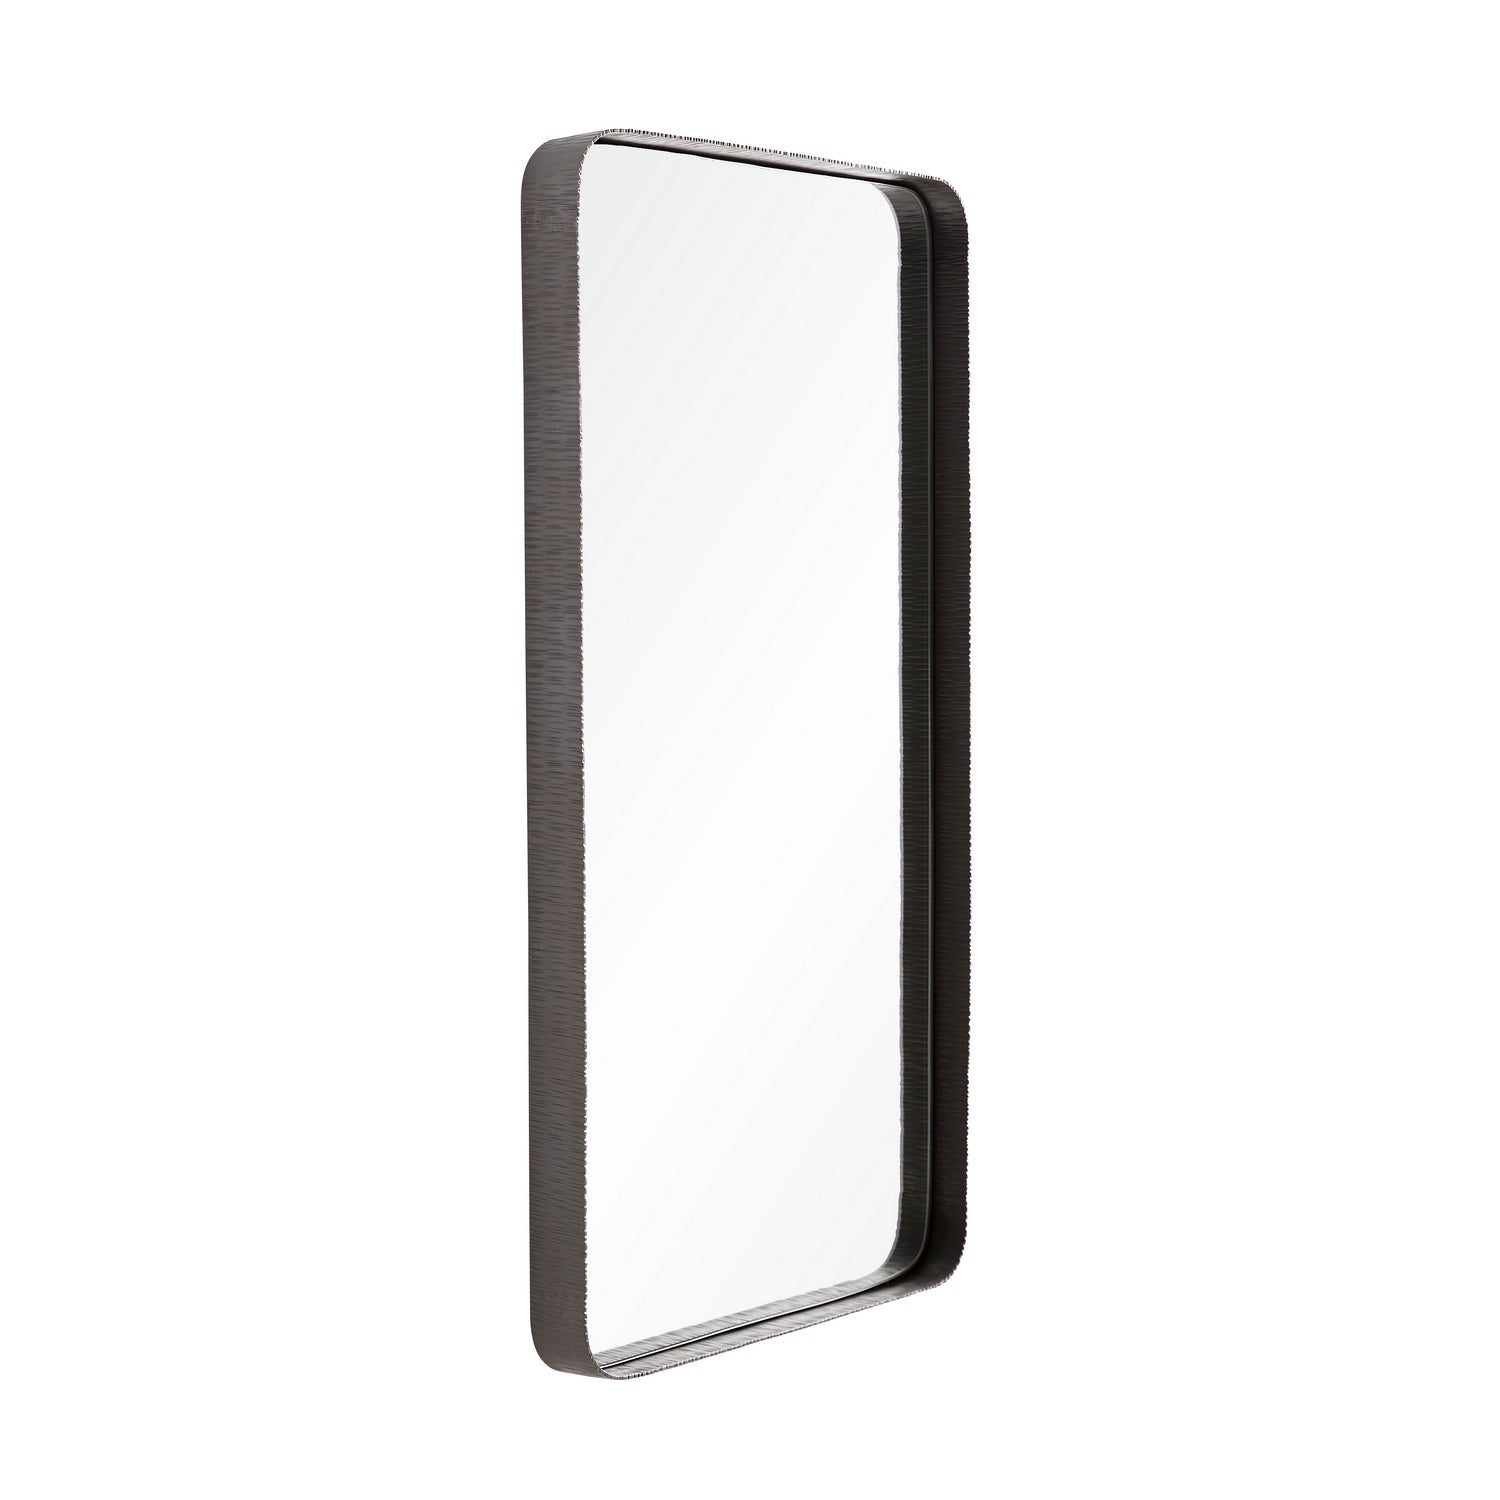 Mirror from the Hubert collection in Natural Iron finish